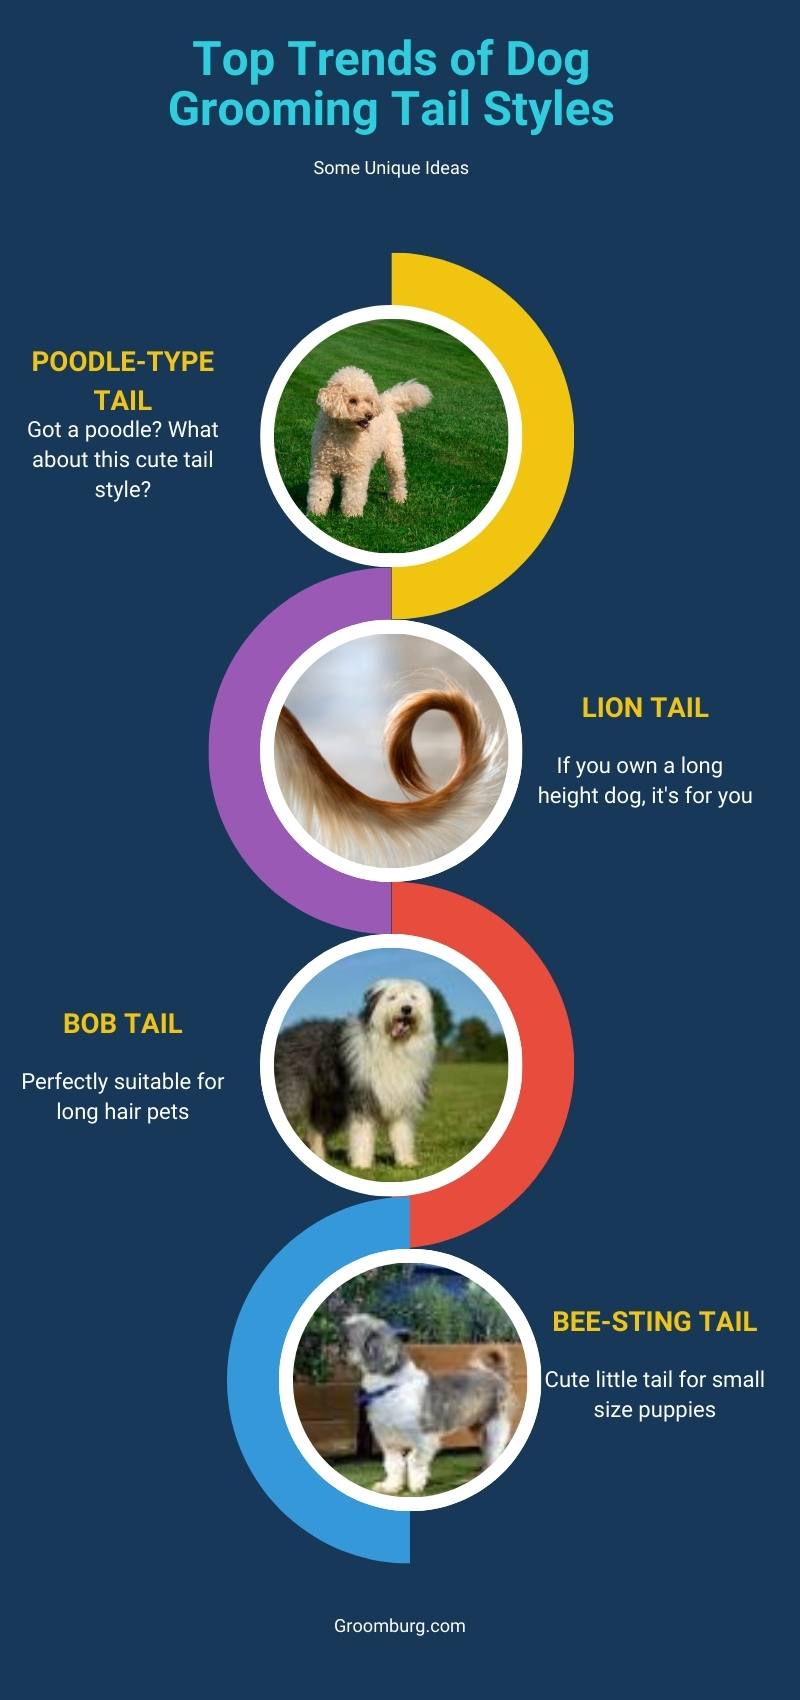 General Trends of Dog Grooming Tail Styles